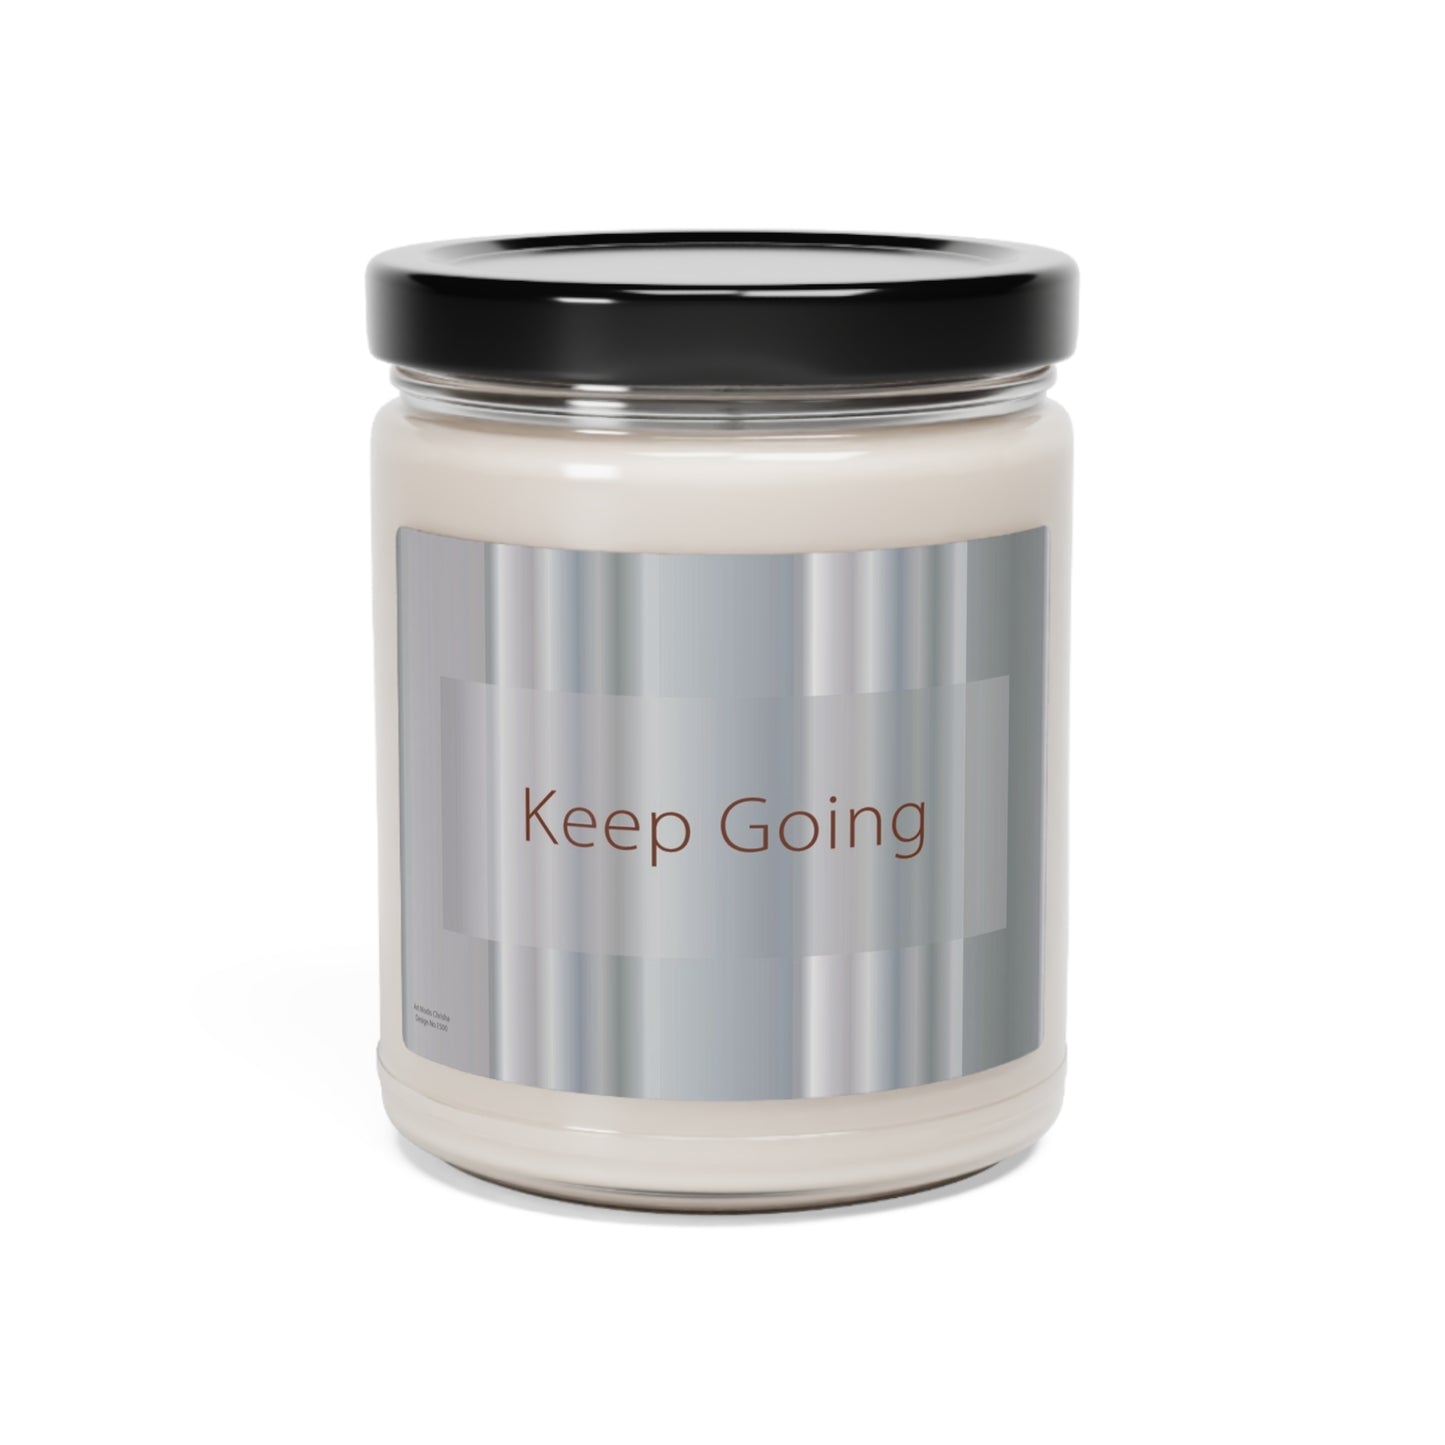 Scented Soy Candle, 9oz Keep Going - Design No.1500